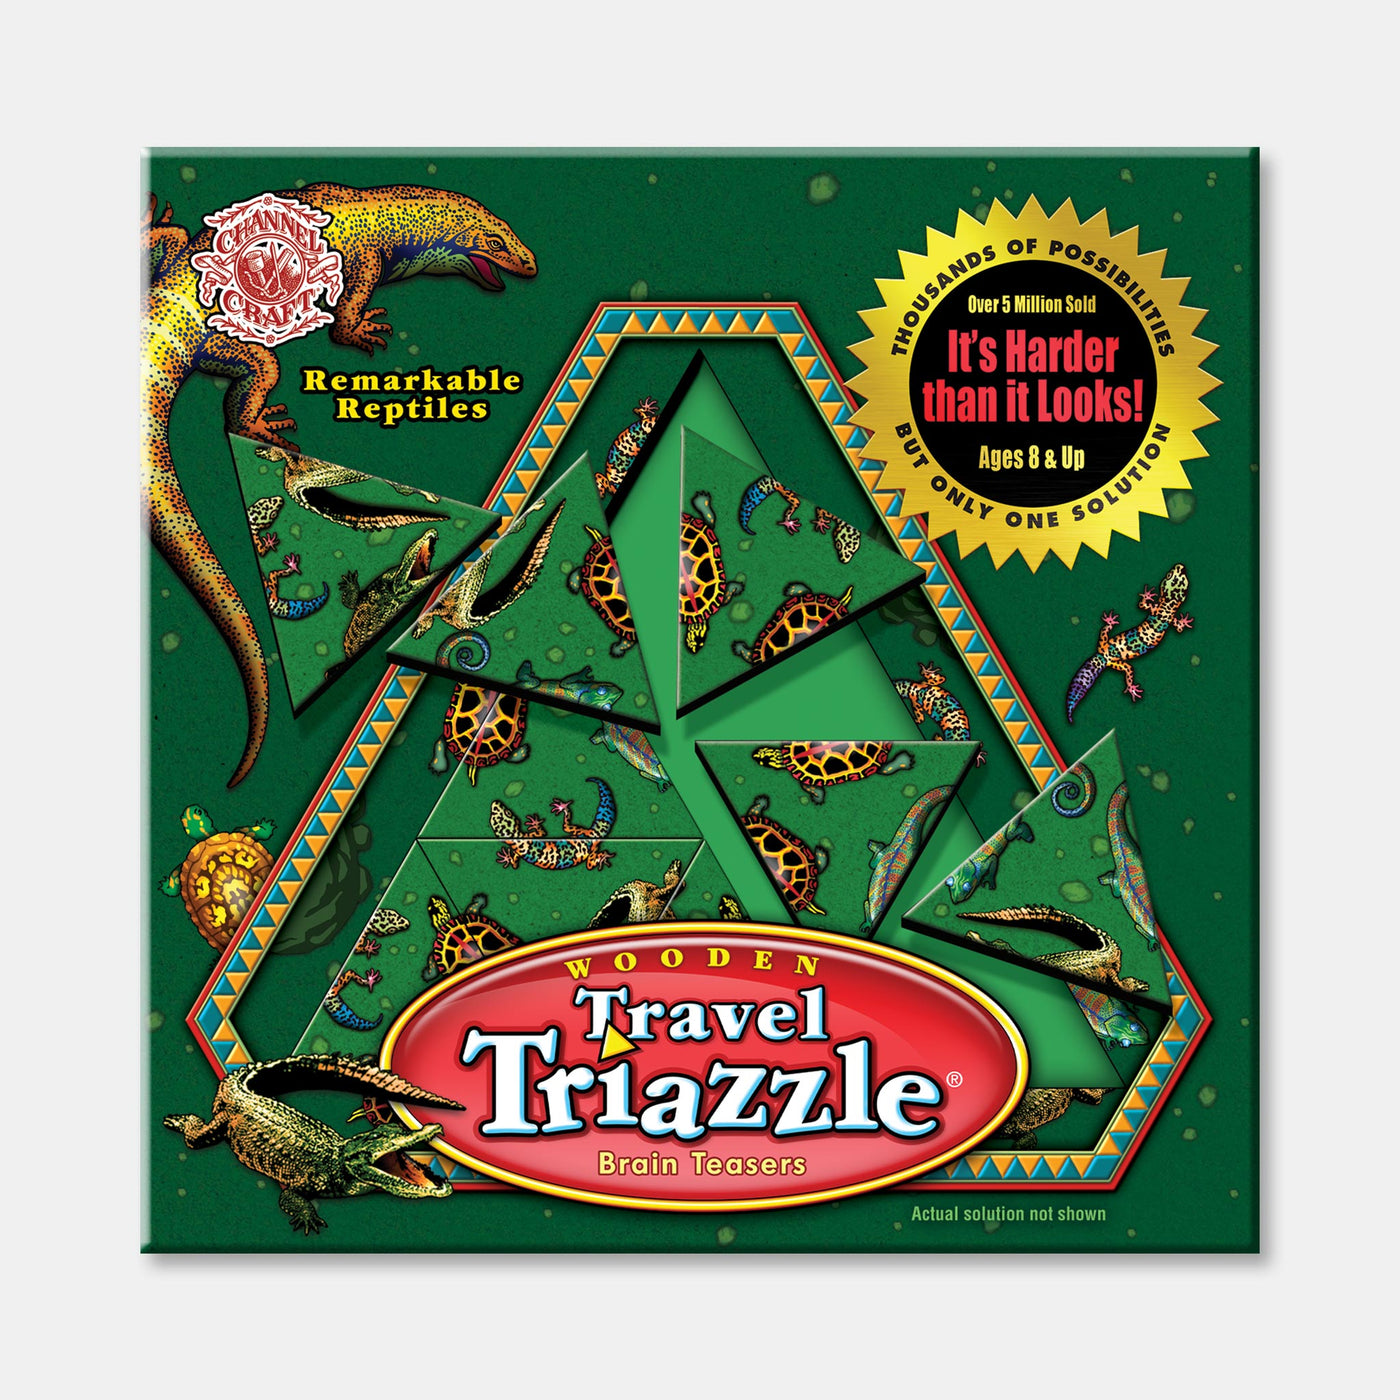 Remarkable Reptiles - Travel Triazzle